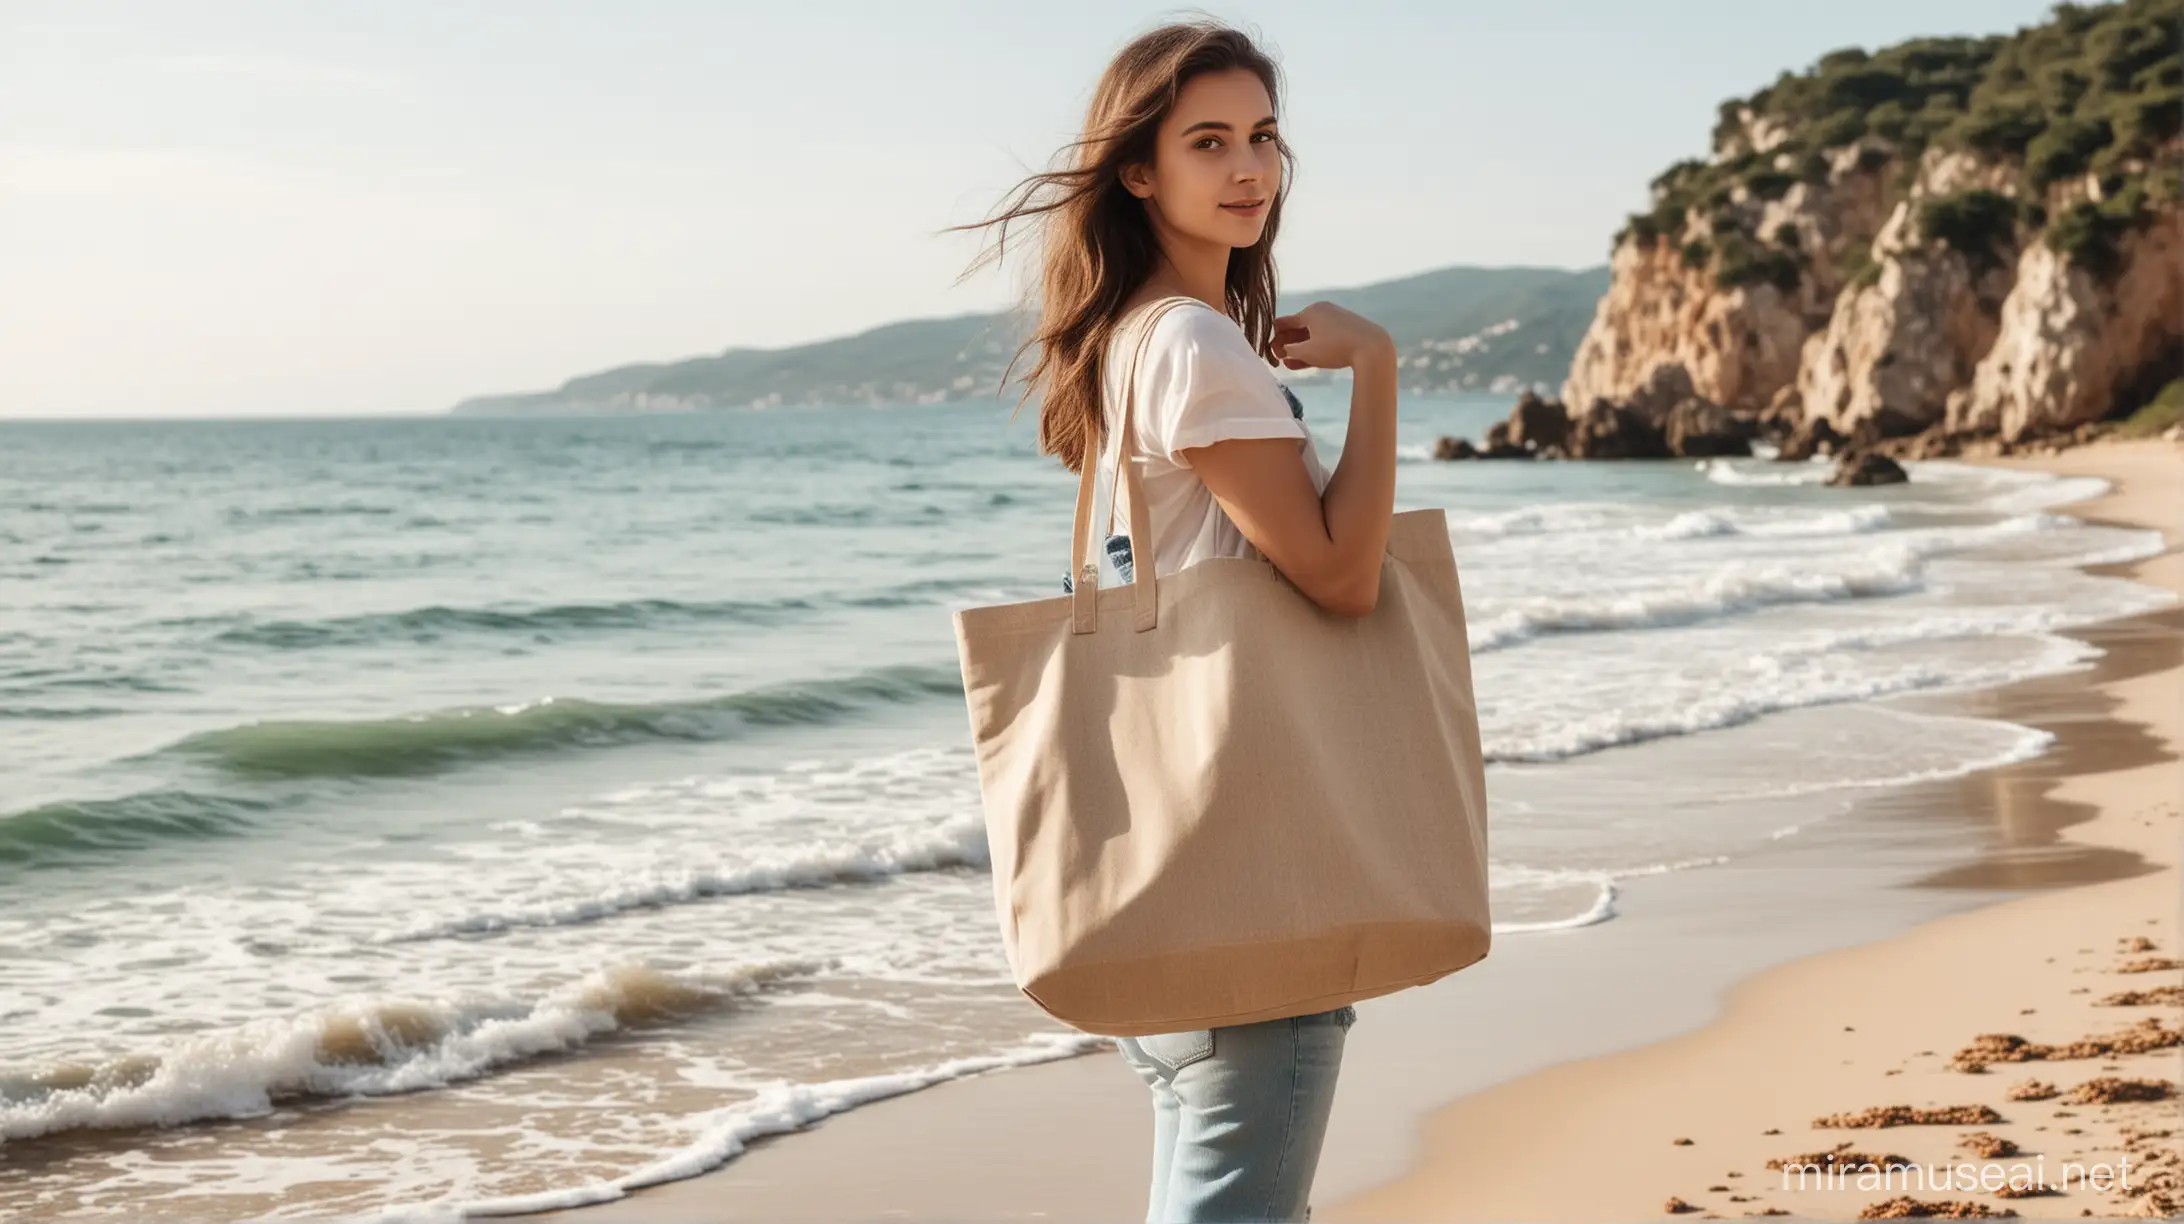 Young Pretty Girl Carrying Tote Bag stands on the beach by the sea photo mockup